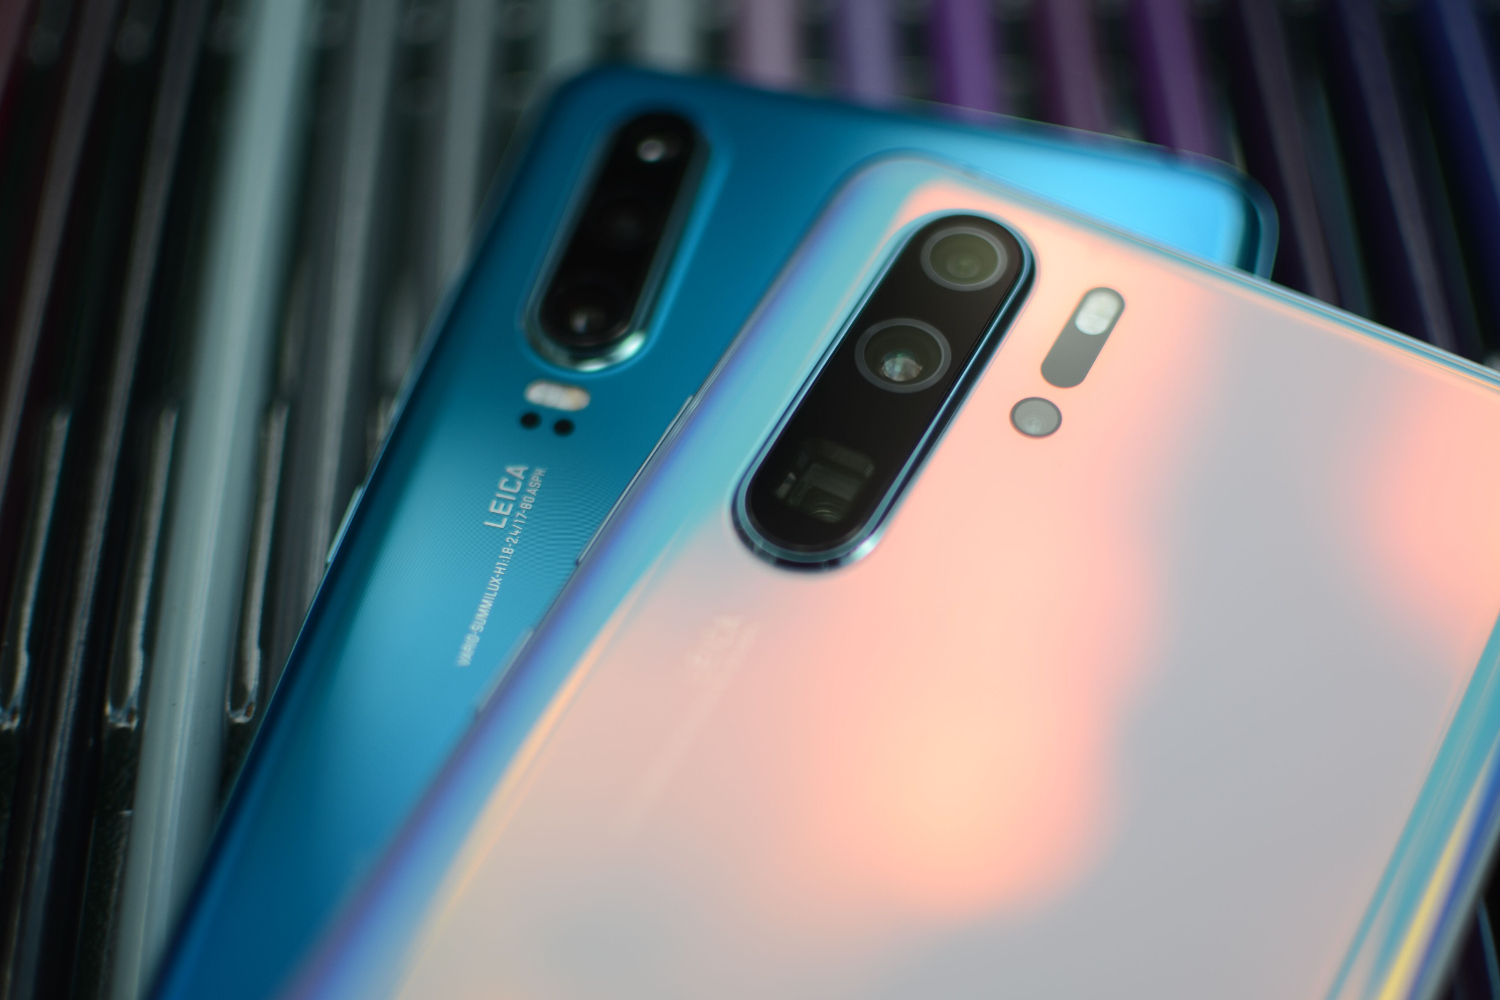 Huawei P30 Pro pictures, official photos